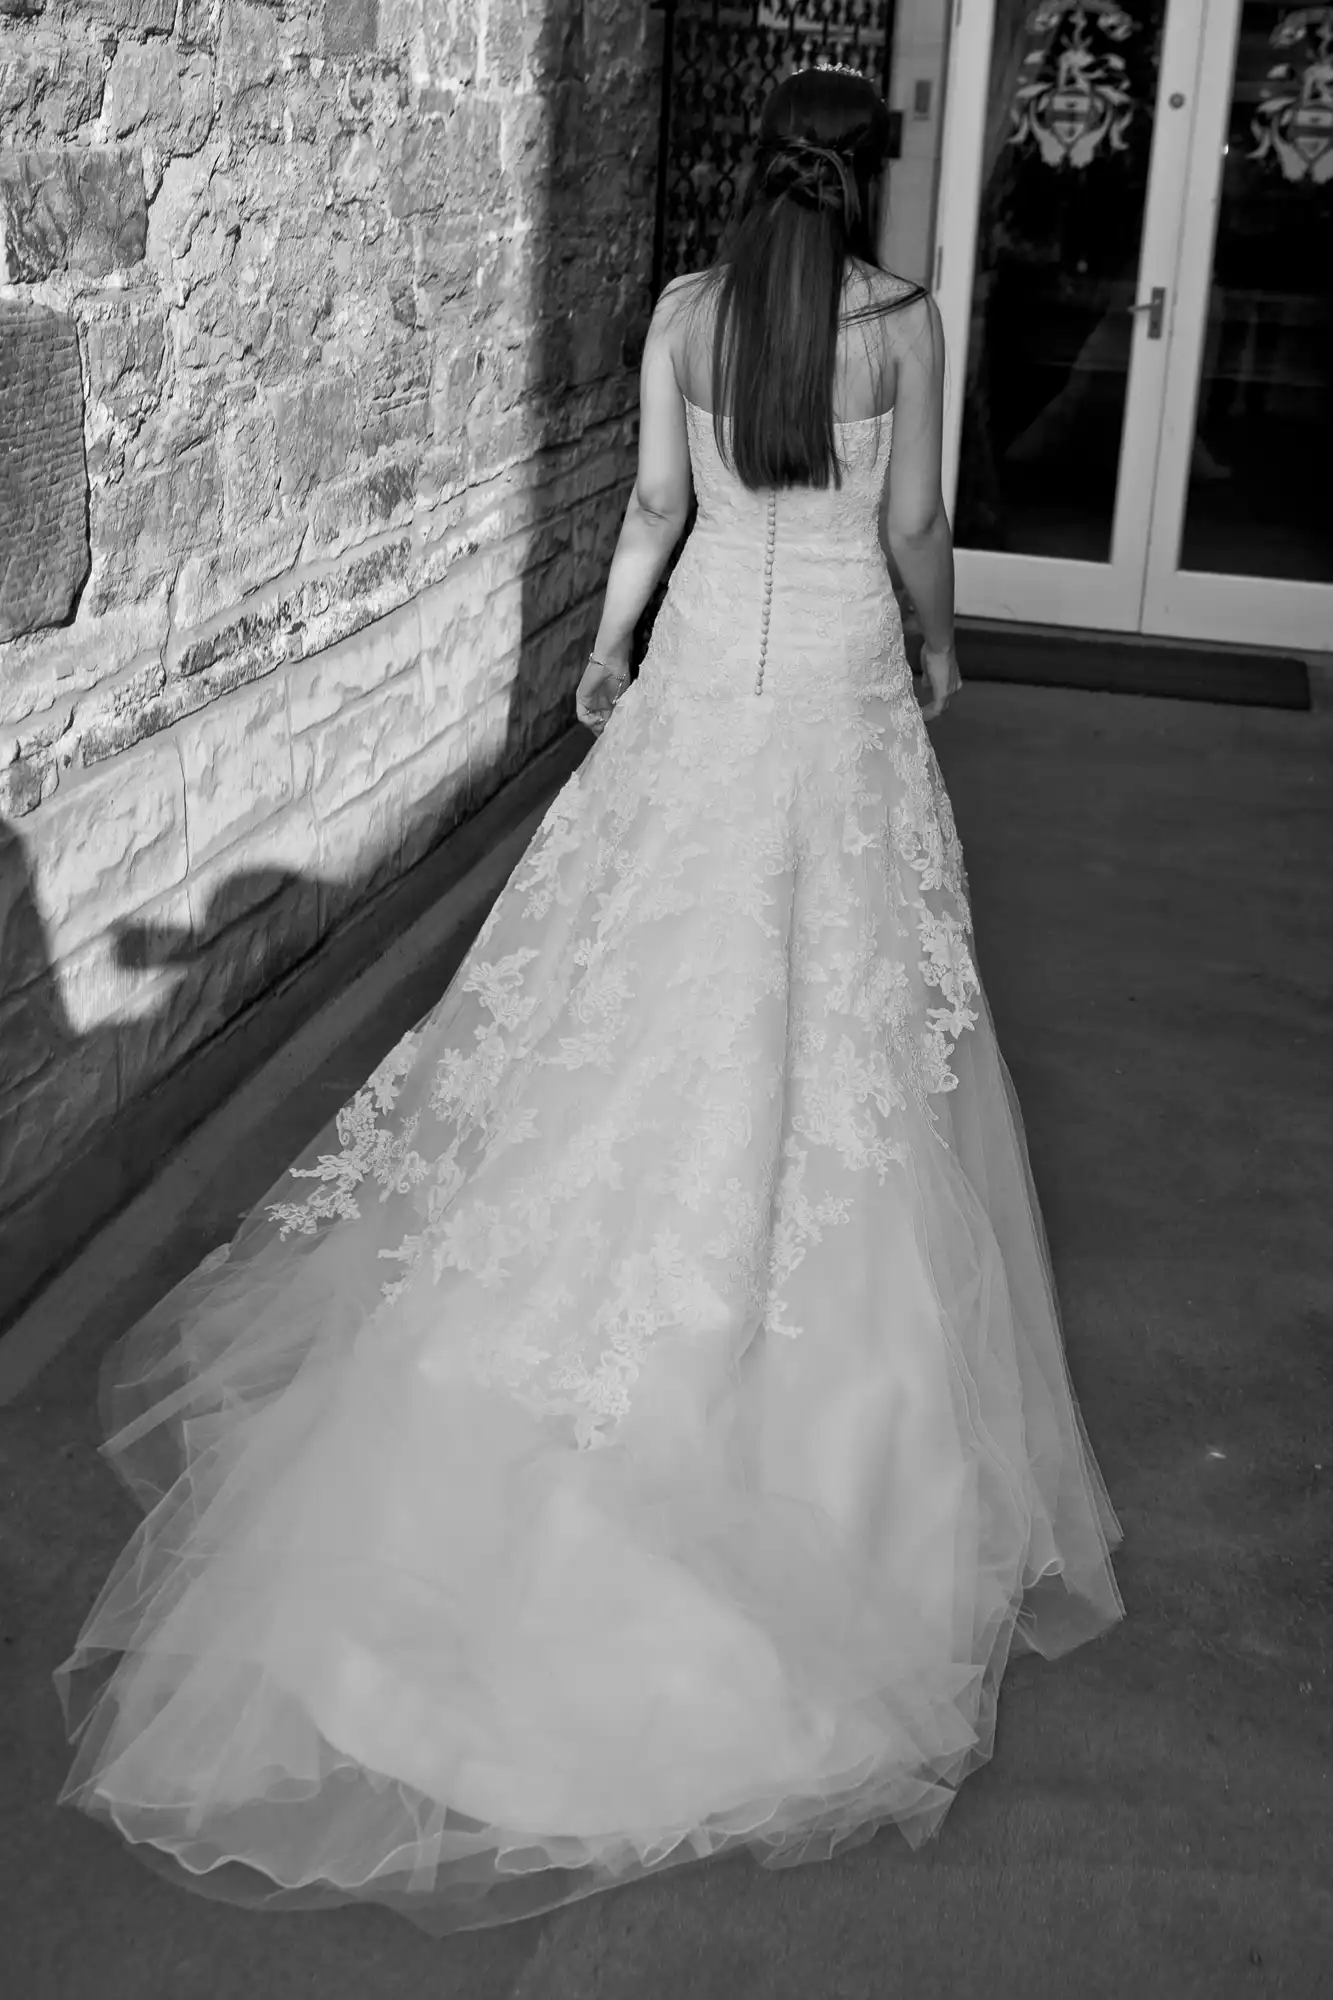 A woman in a lace wedding dress walking away from the camera, with a focus on the detailed gown and train, in black and white.